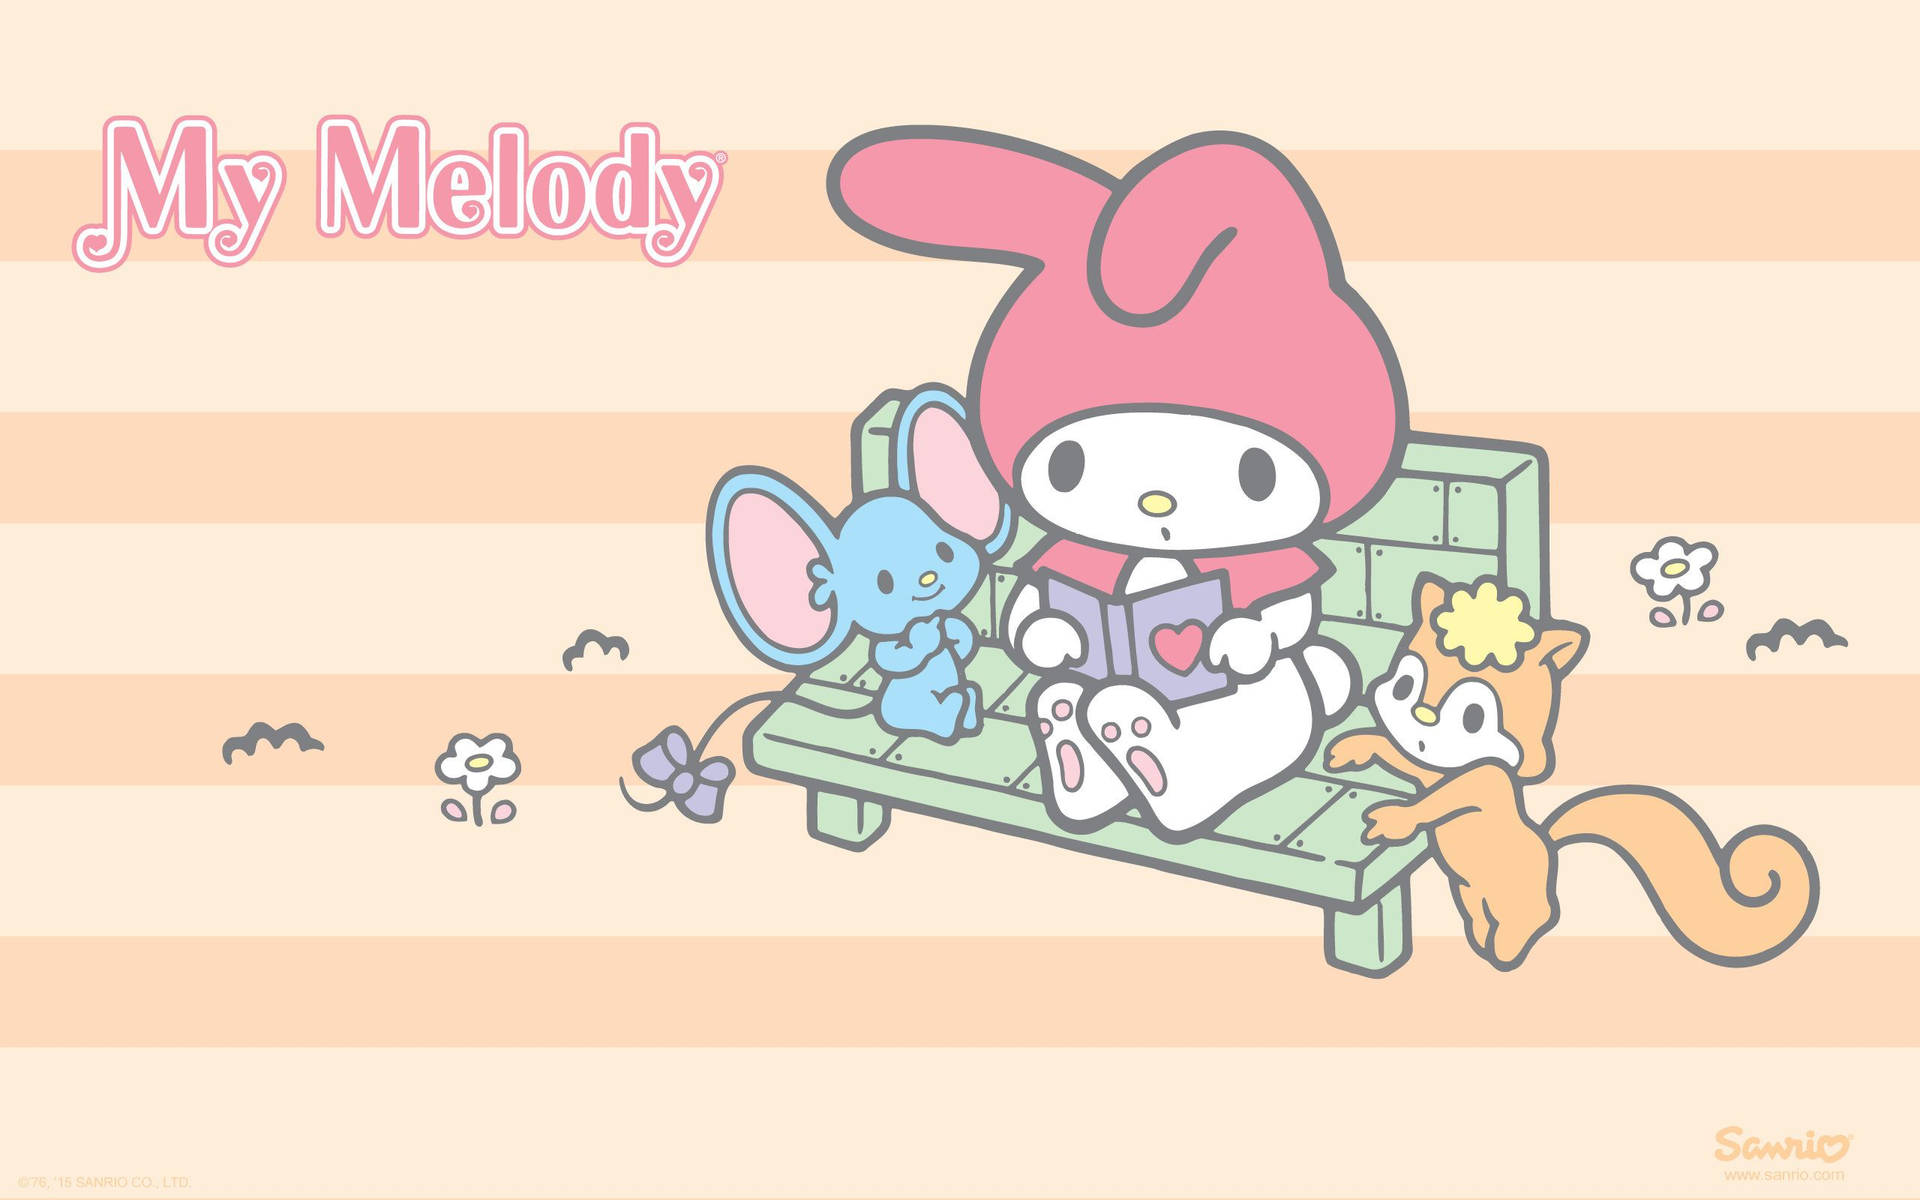 Join My Melody, Cinnamoroll, Keroppi, Badtz-maru, And Hangyodon For Fun And Frolic Background